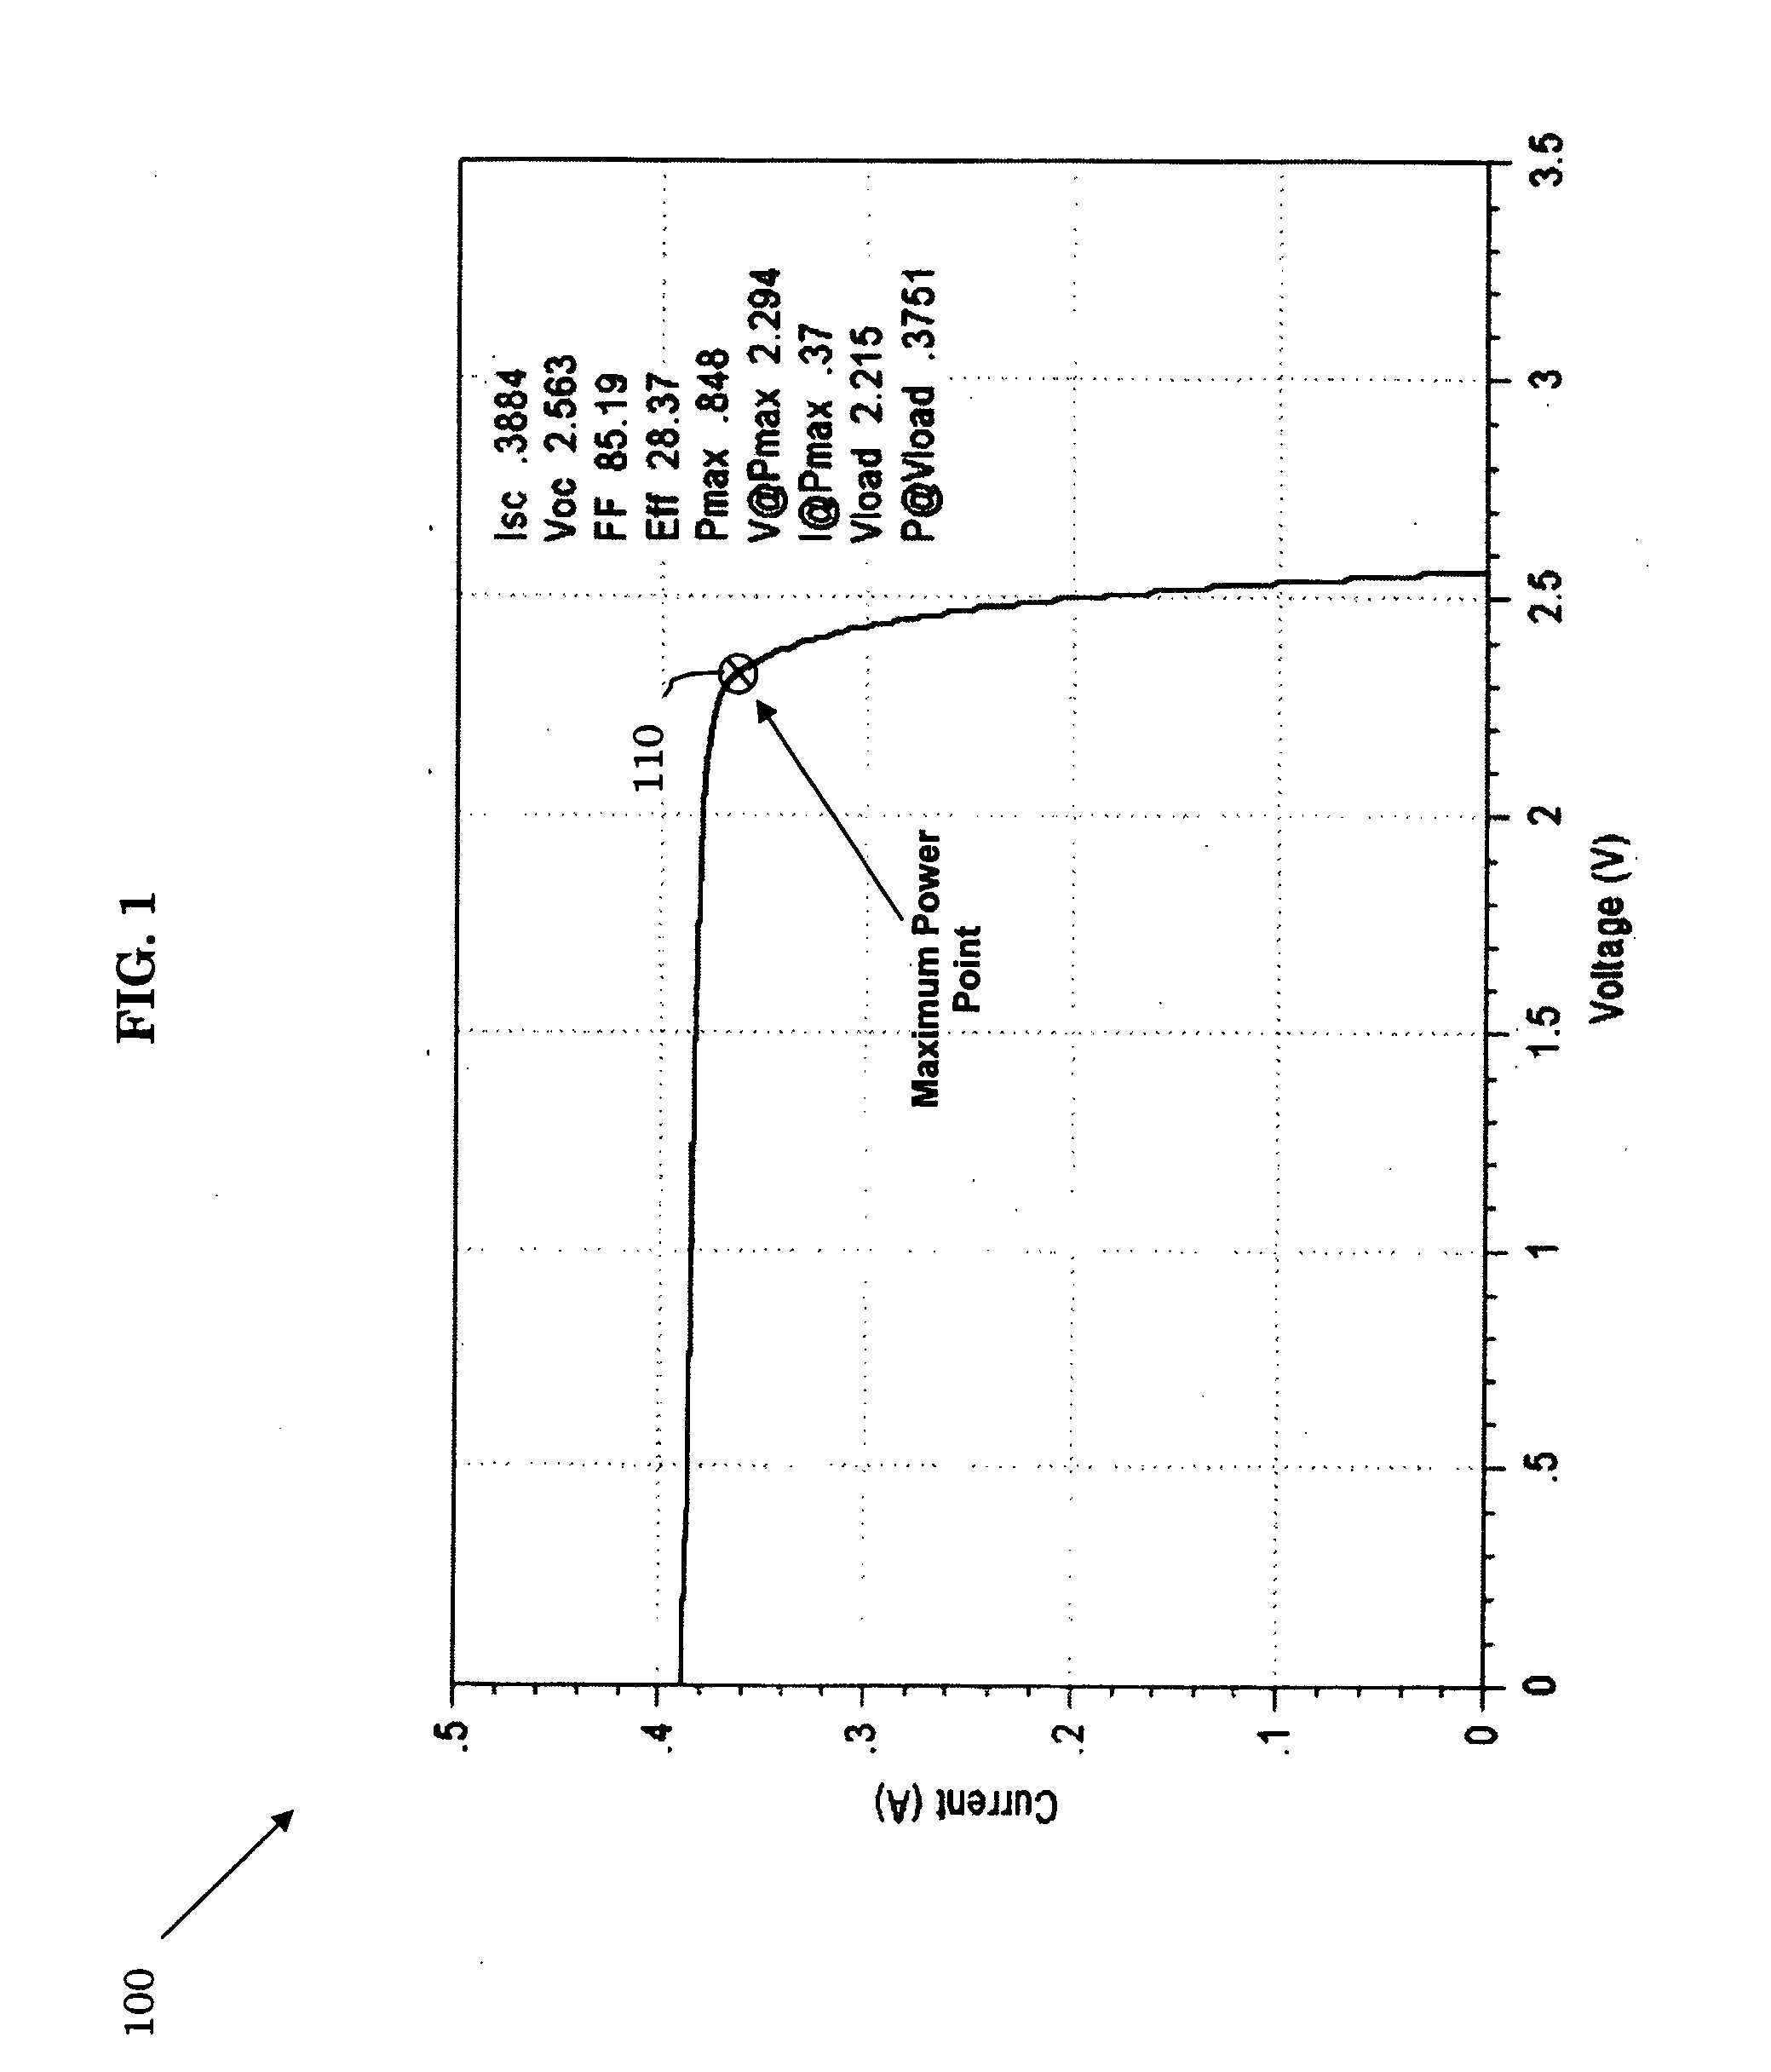 Systems and Methods for Providing Maximum Photovoltaic Peak Power Tracking